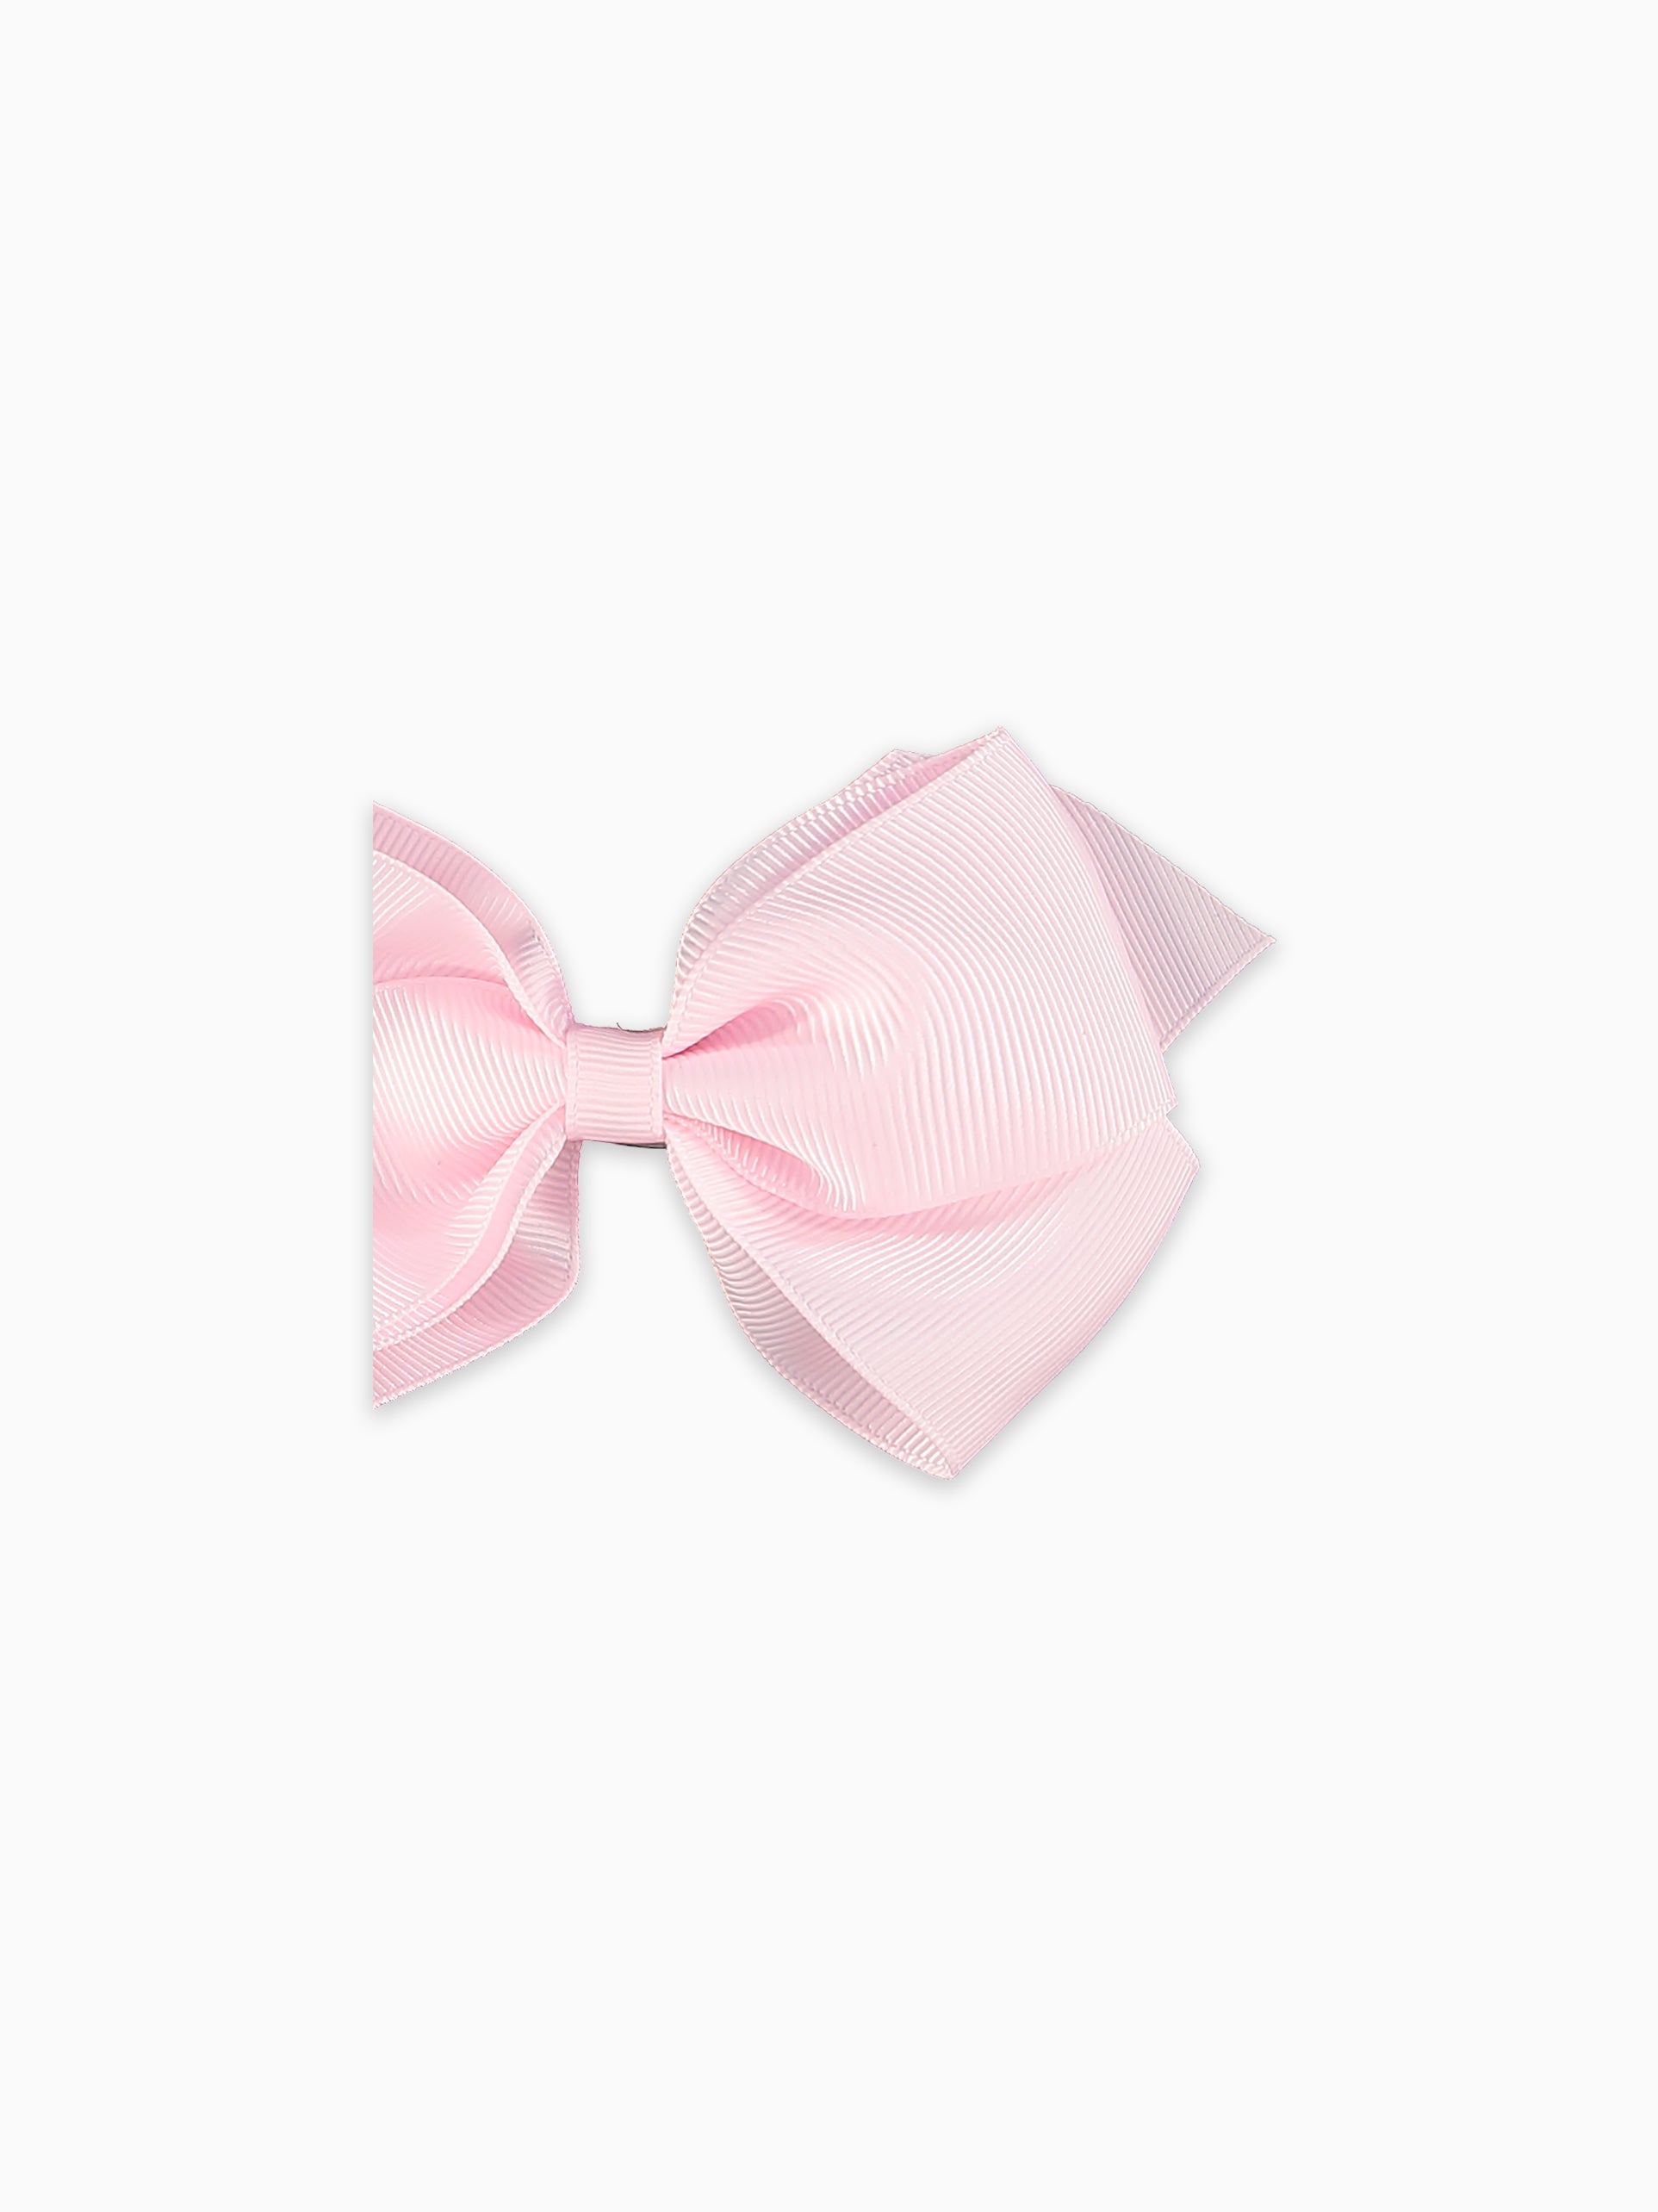 Baby Pink Big Bow Girl Clip